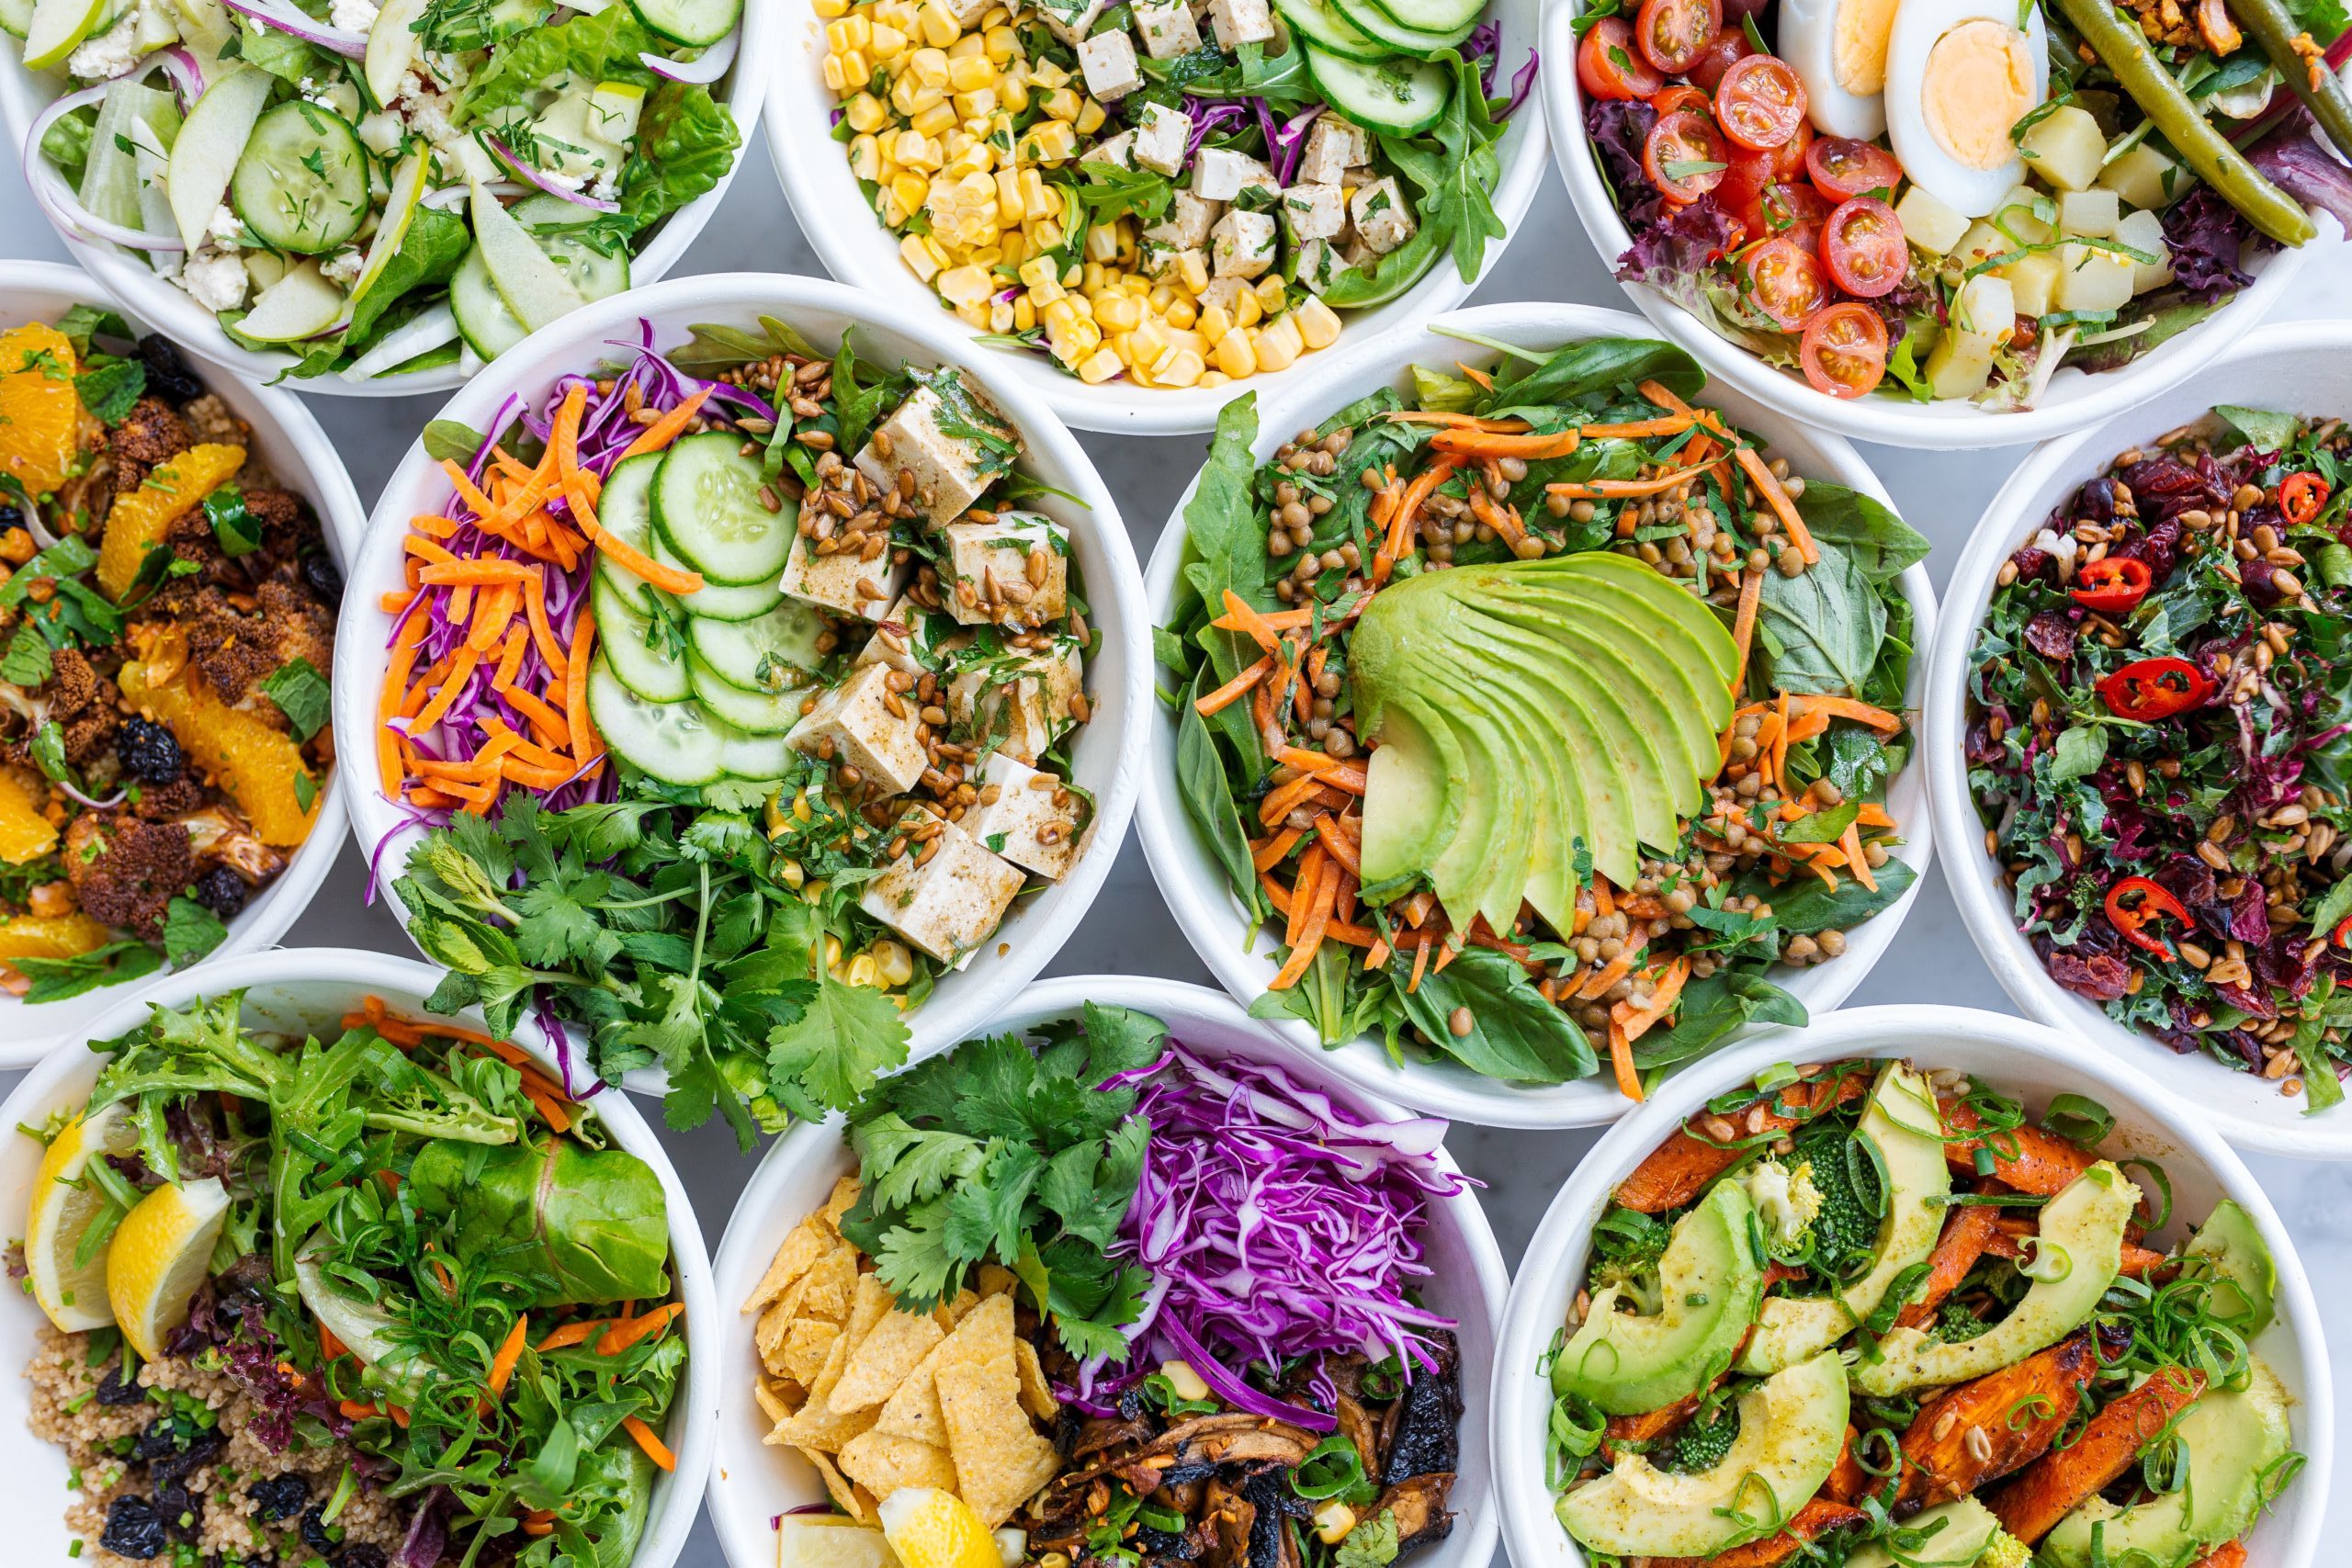 Many different salads in white bowls